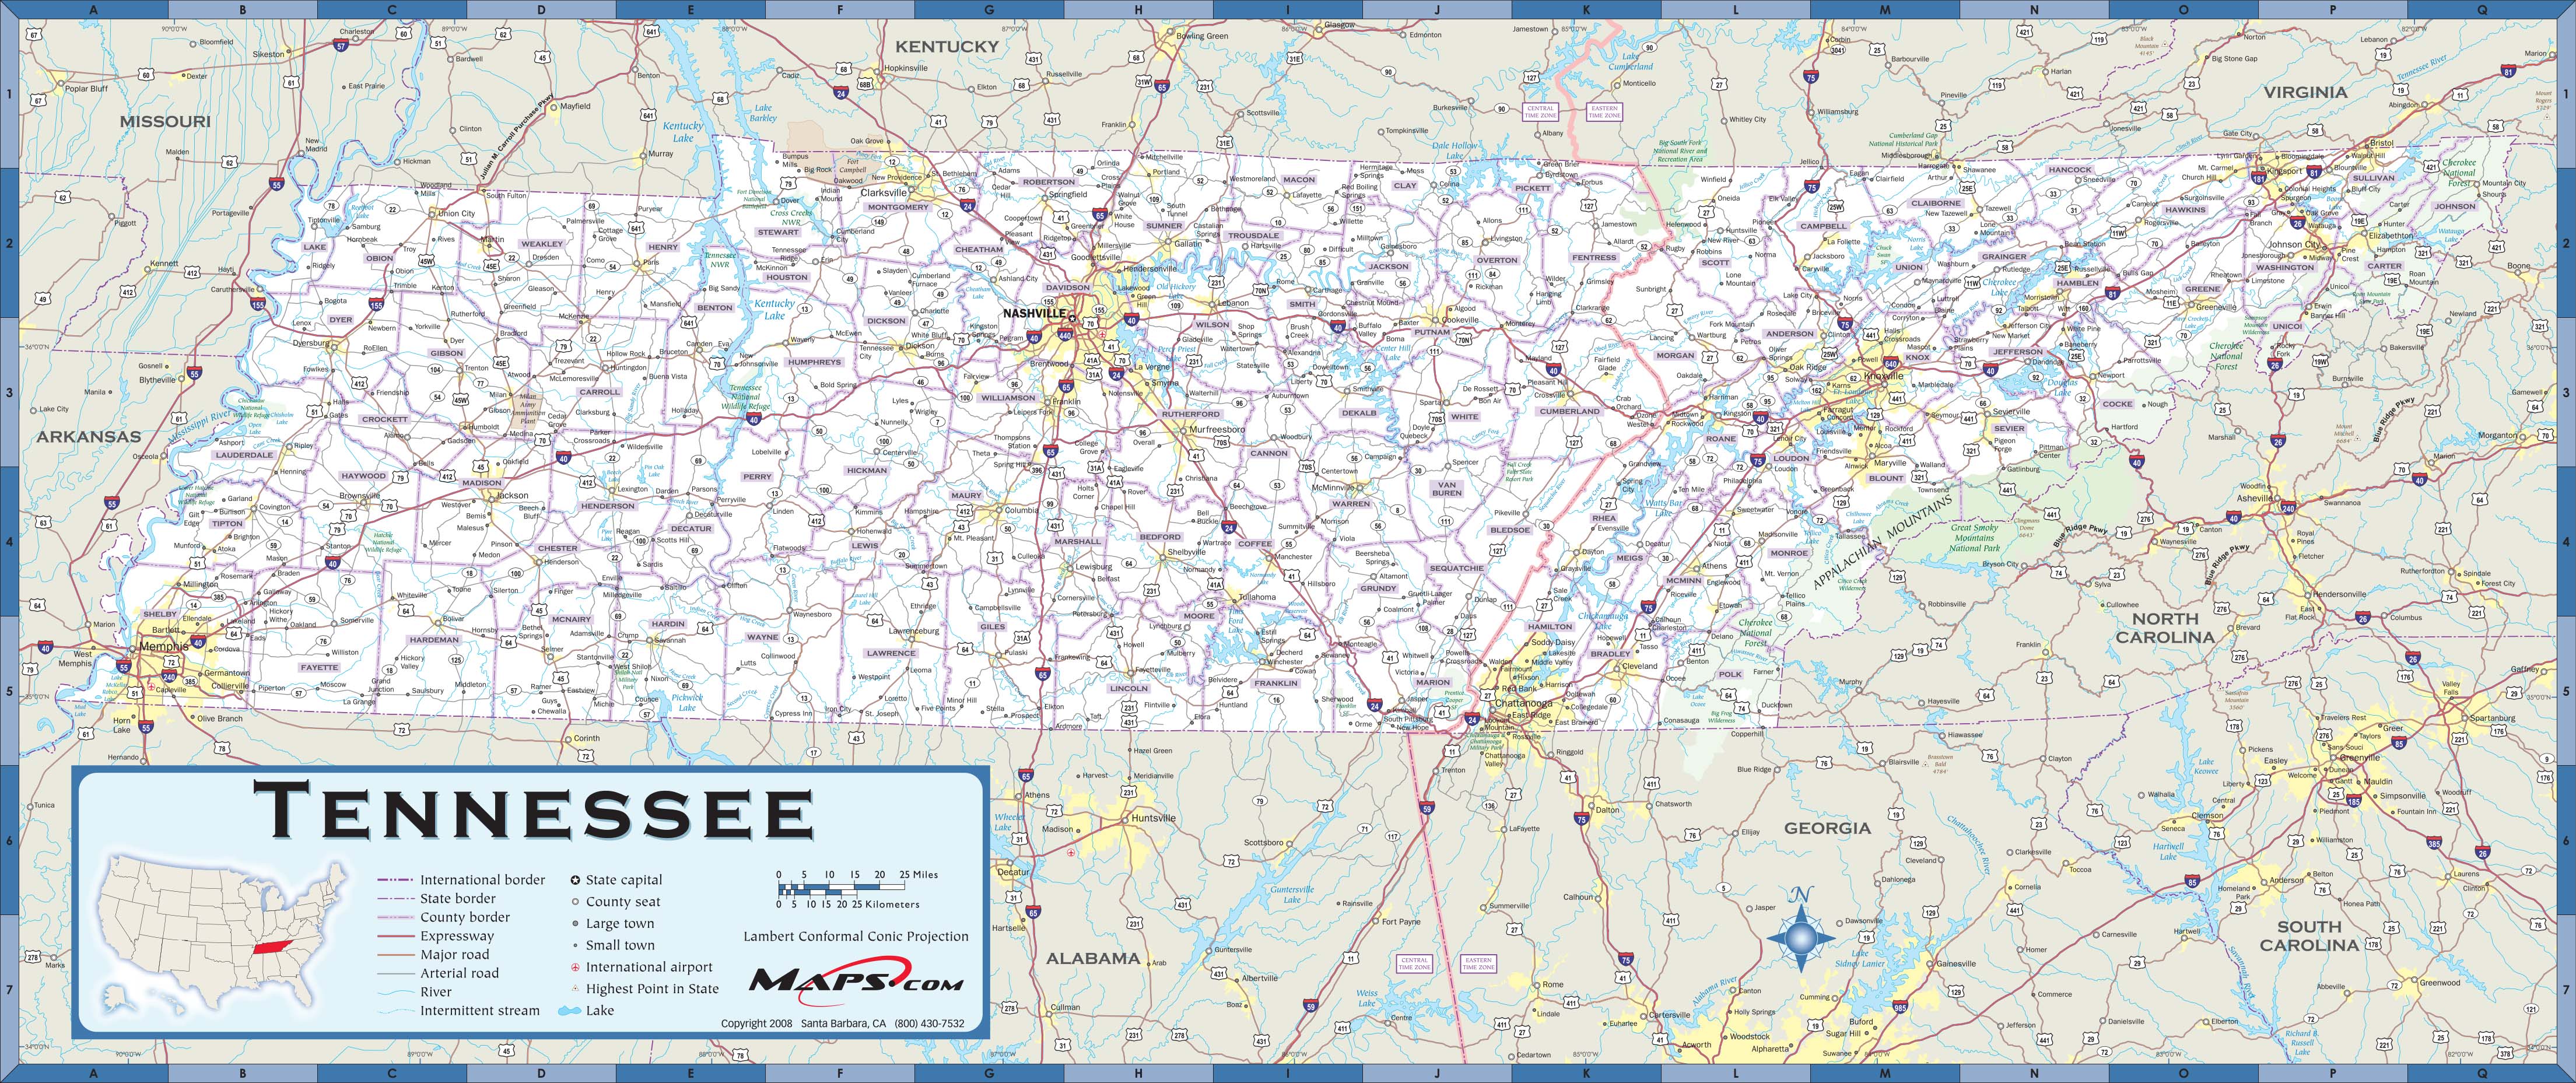 Tennessee County Highway Wall Map by Maps.com - MapSales